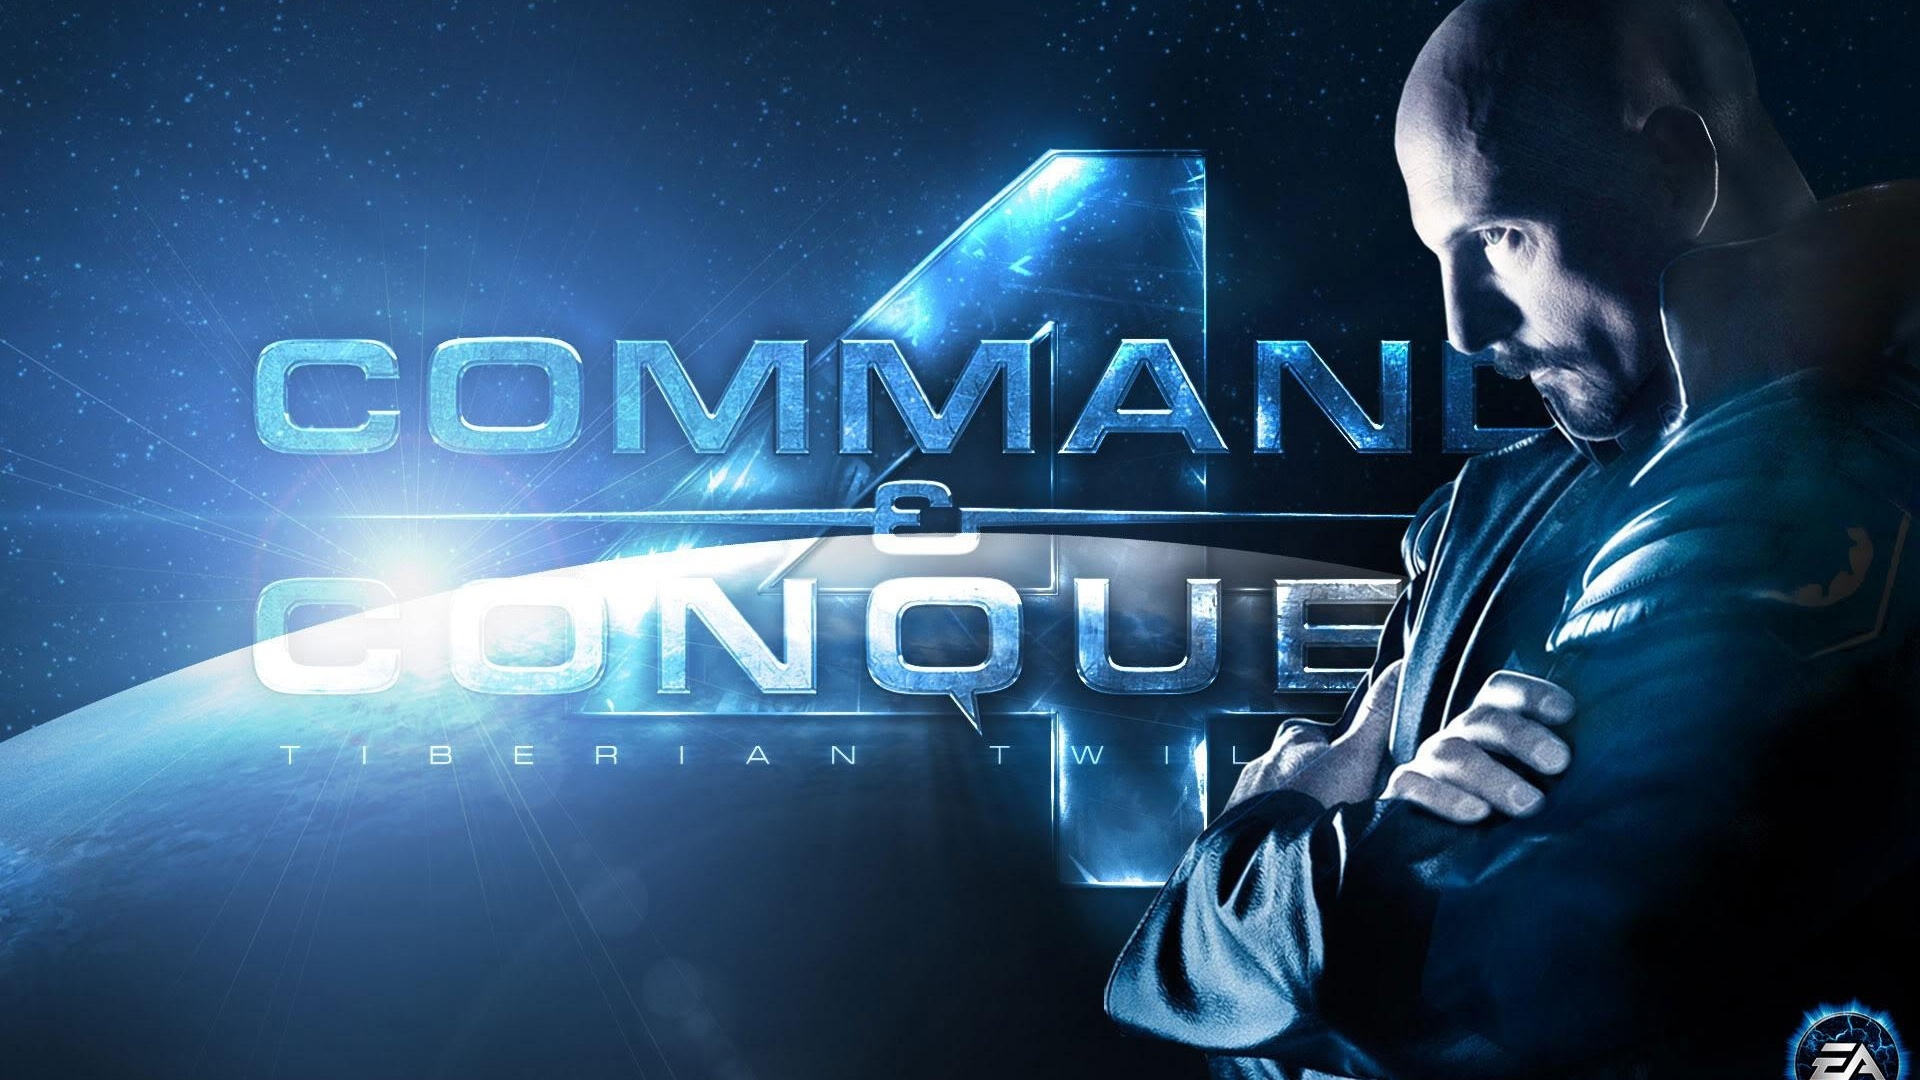 Command and Conquer Tiberian Twilight for 1920 x 1080 HDTV 1080p resolution